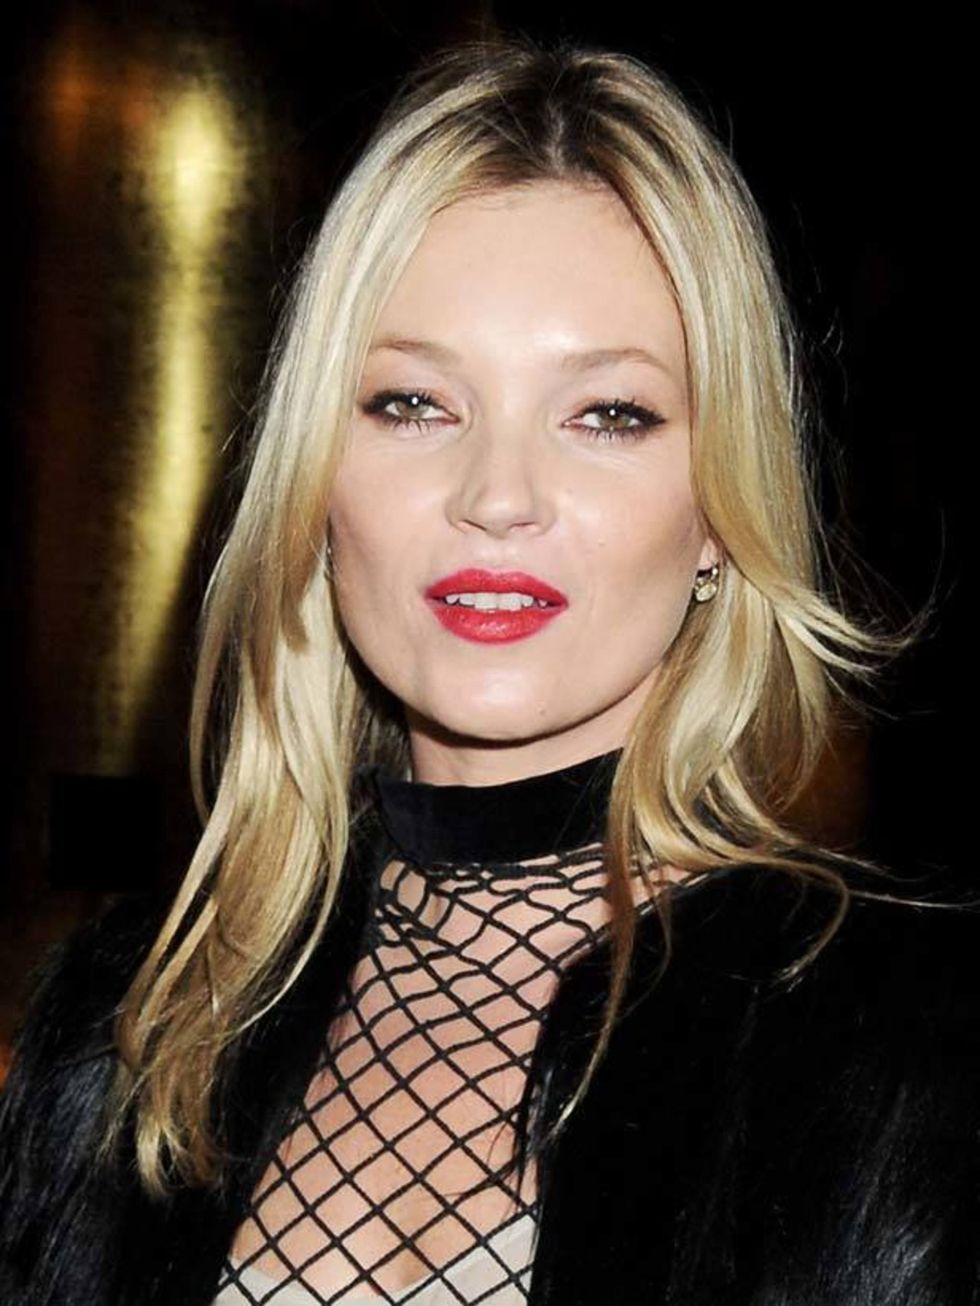 <p><a href="http://www.elleuk.com/beauty/make-up-skin/make-up-features/(section)/new-season-essentials/(offset)//(img)/793051">See Kate Moss' lipstick for Rimmel, here...</a></p>